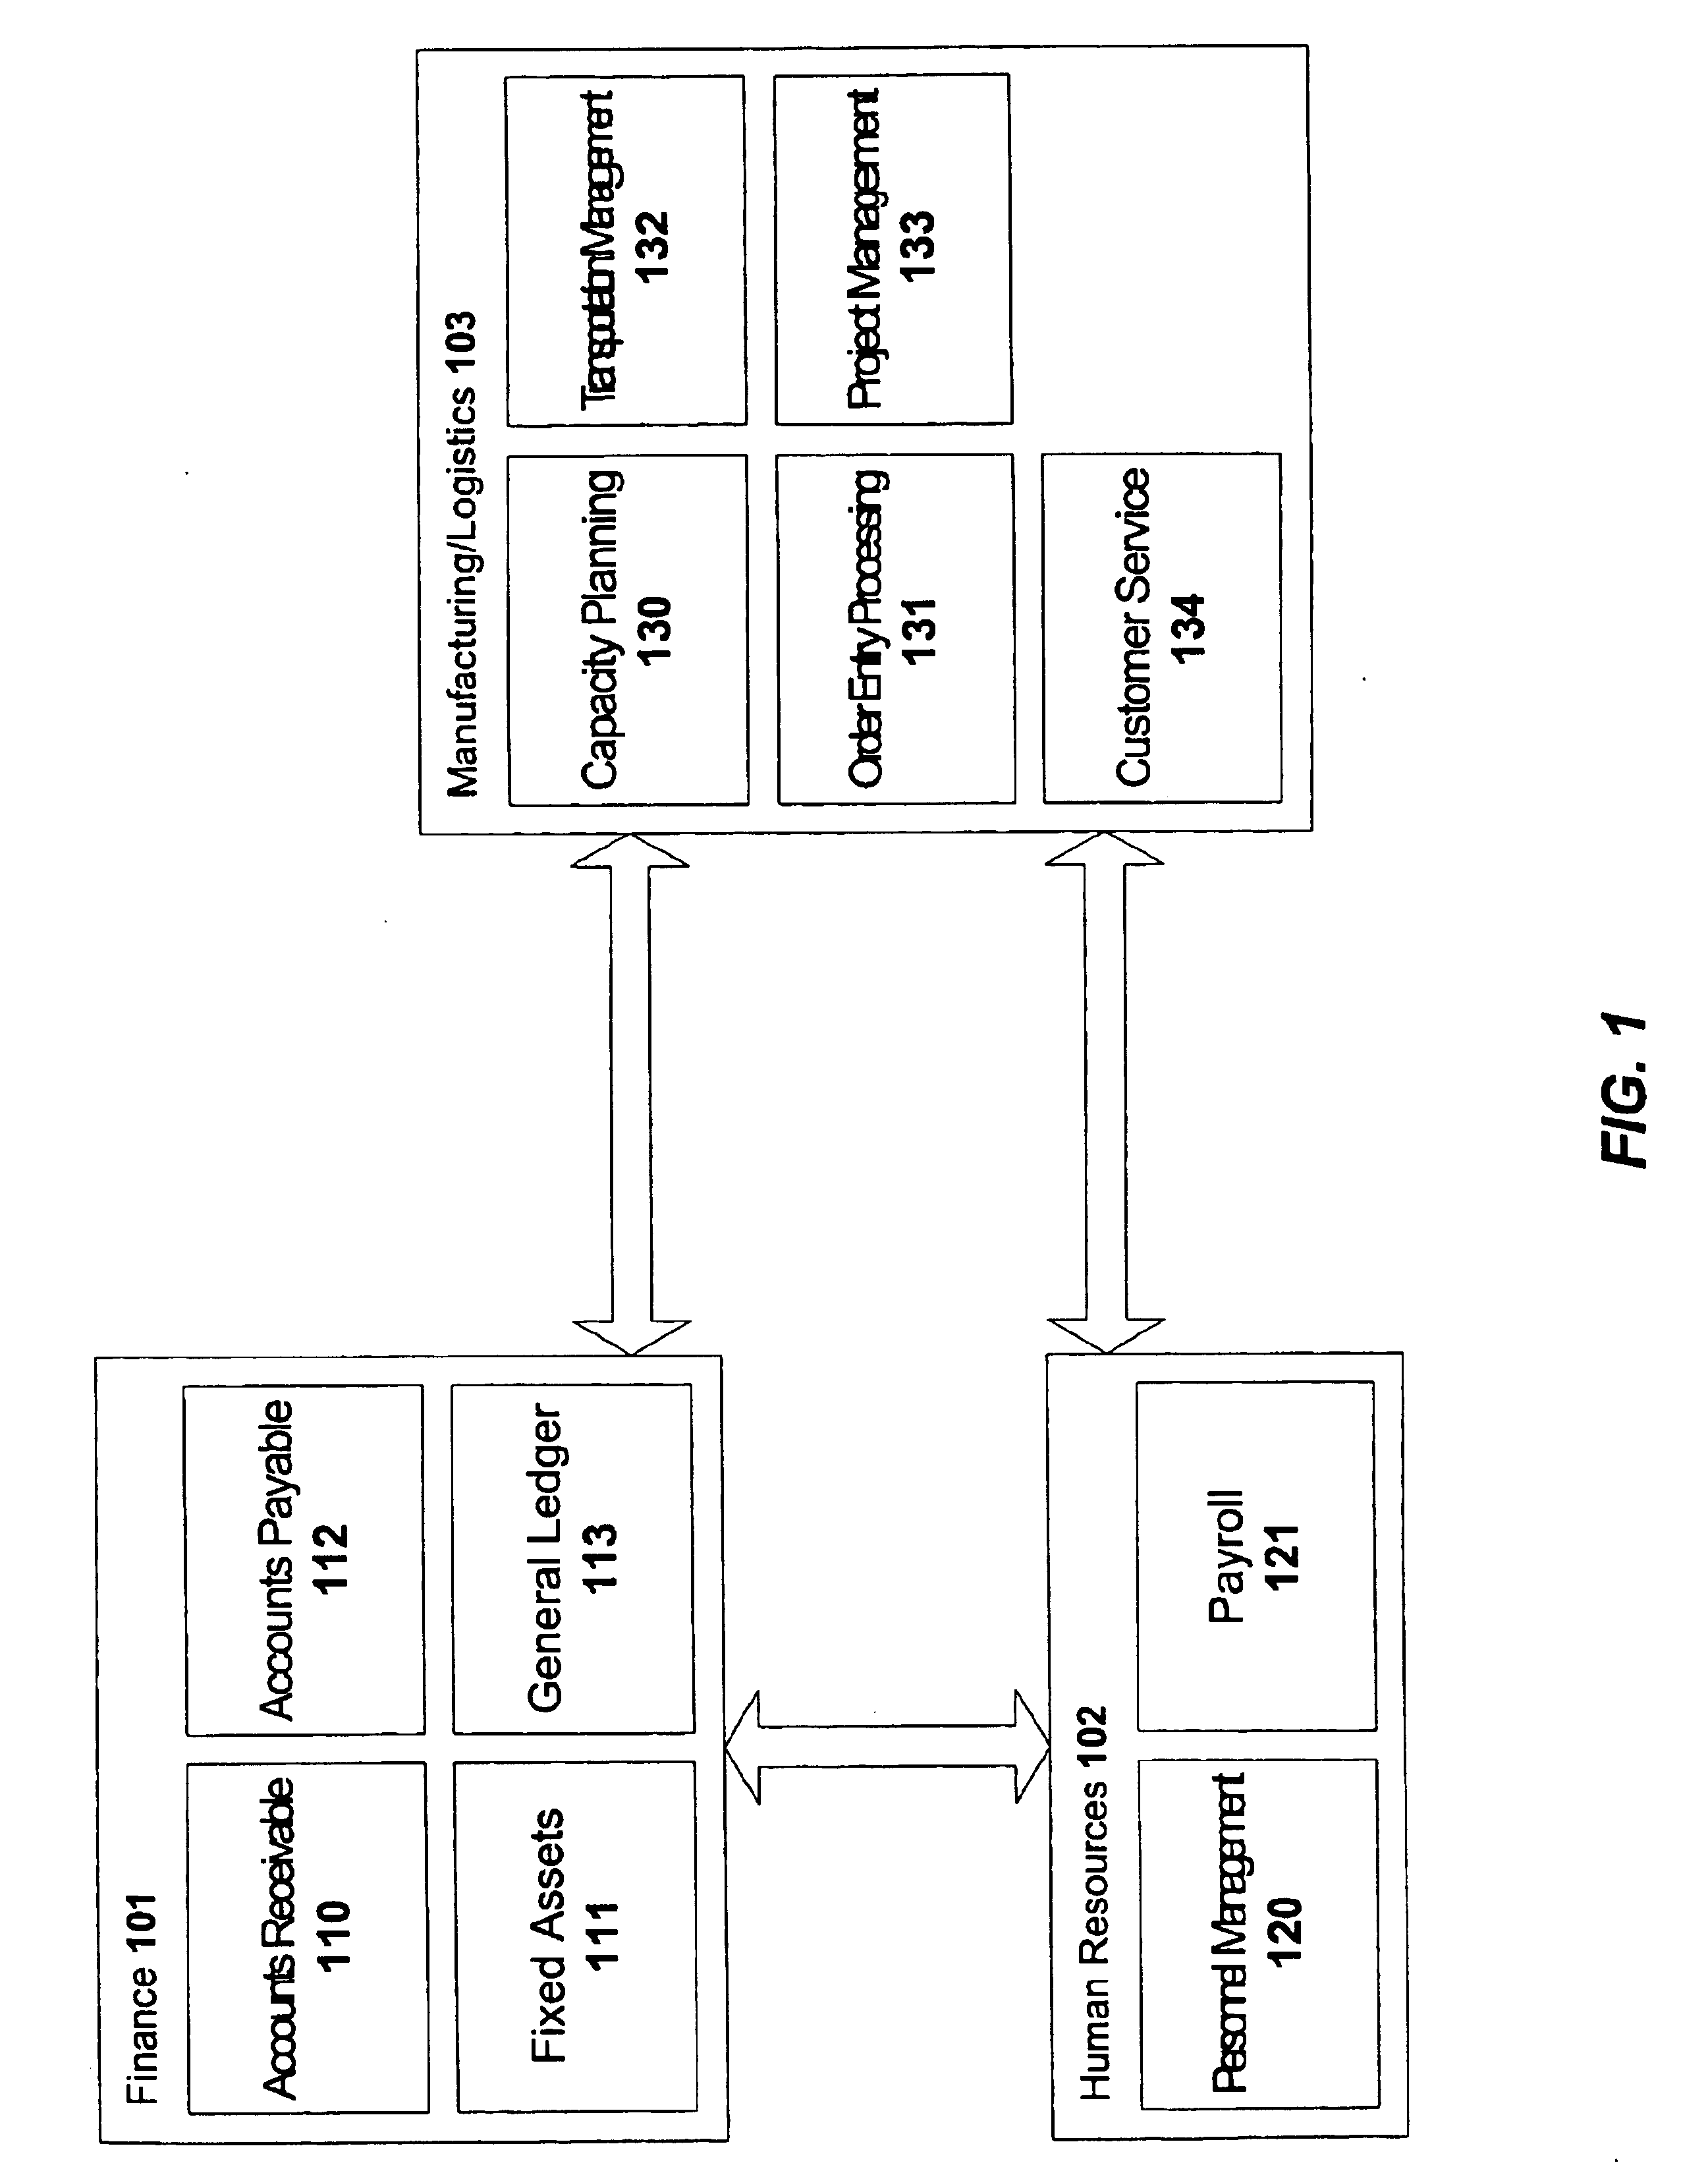 Method and system for dynamic business process management using a partial order planner